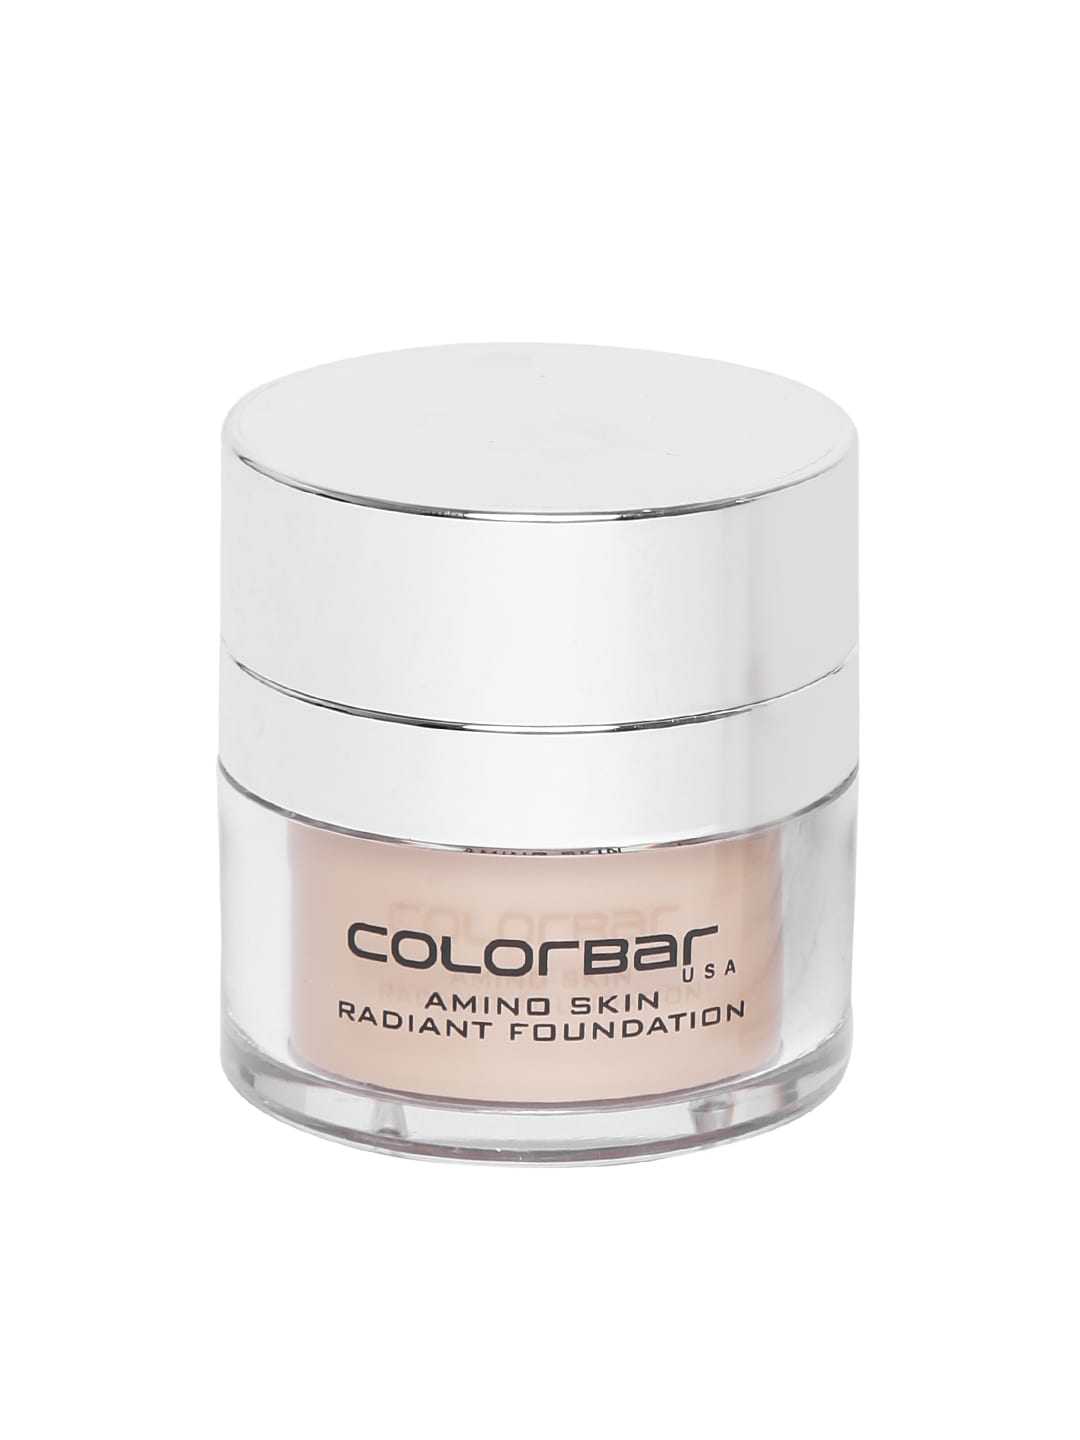 Colorbar Amino Skin Radiant Foundation - 001 Ivory Fair 15g Price in India